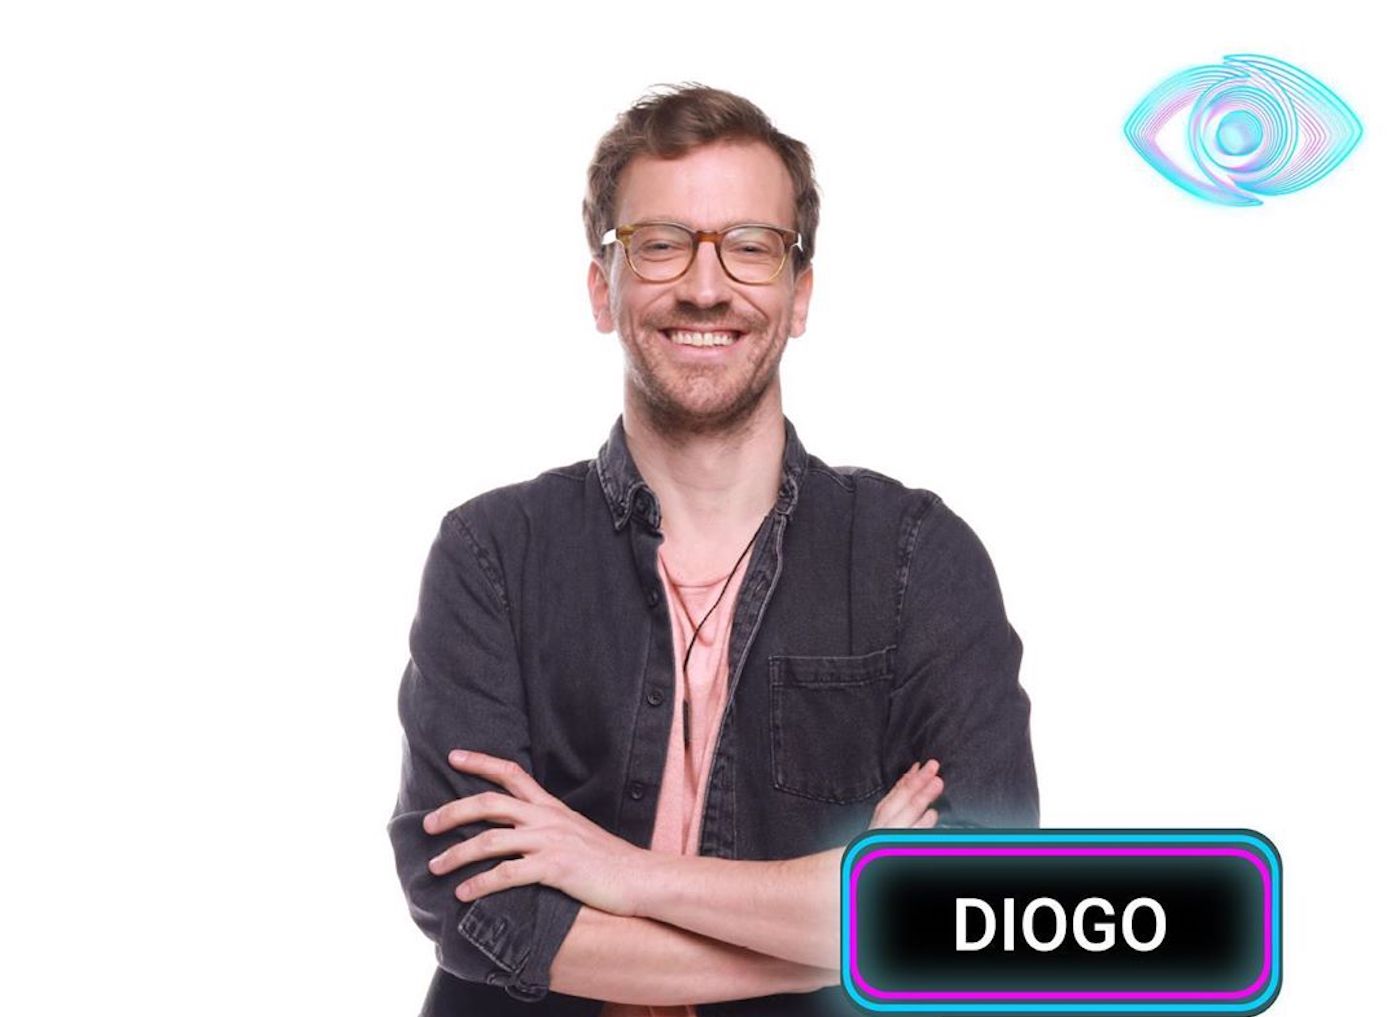 Diogo Big Brother